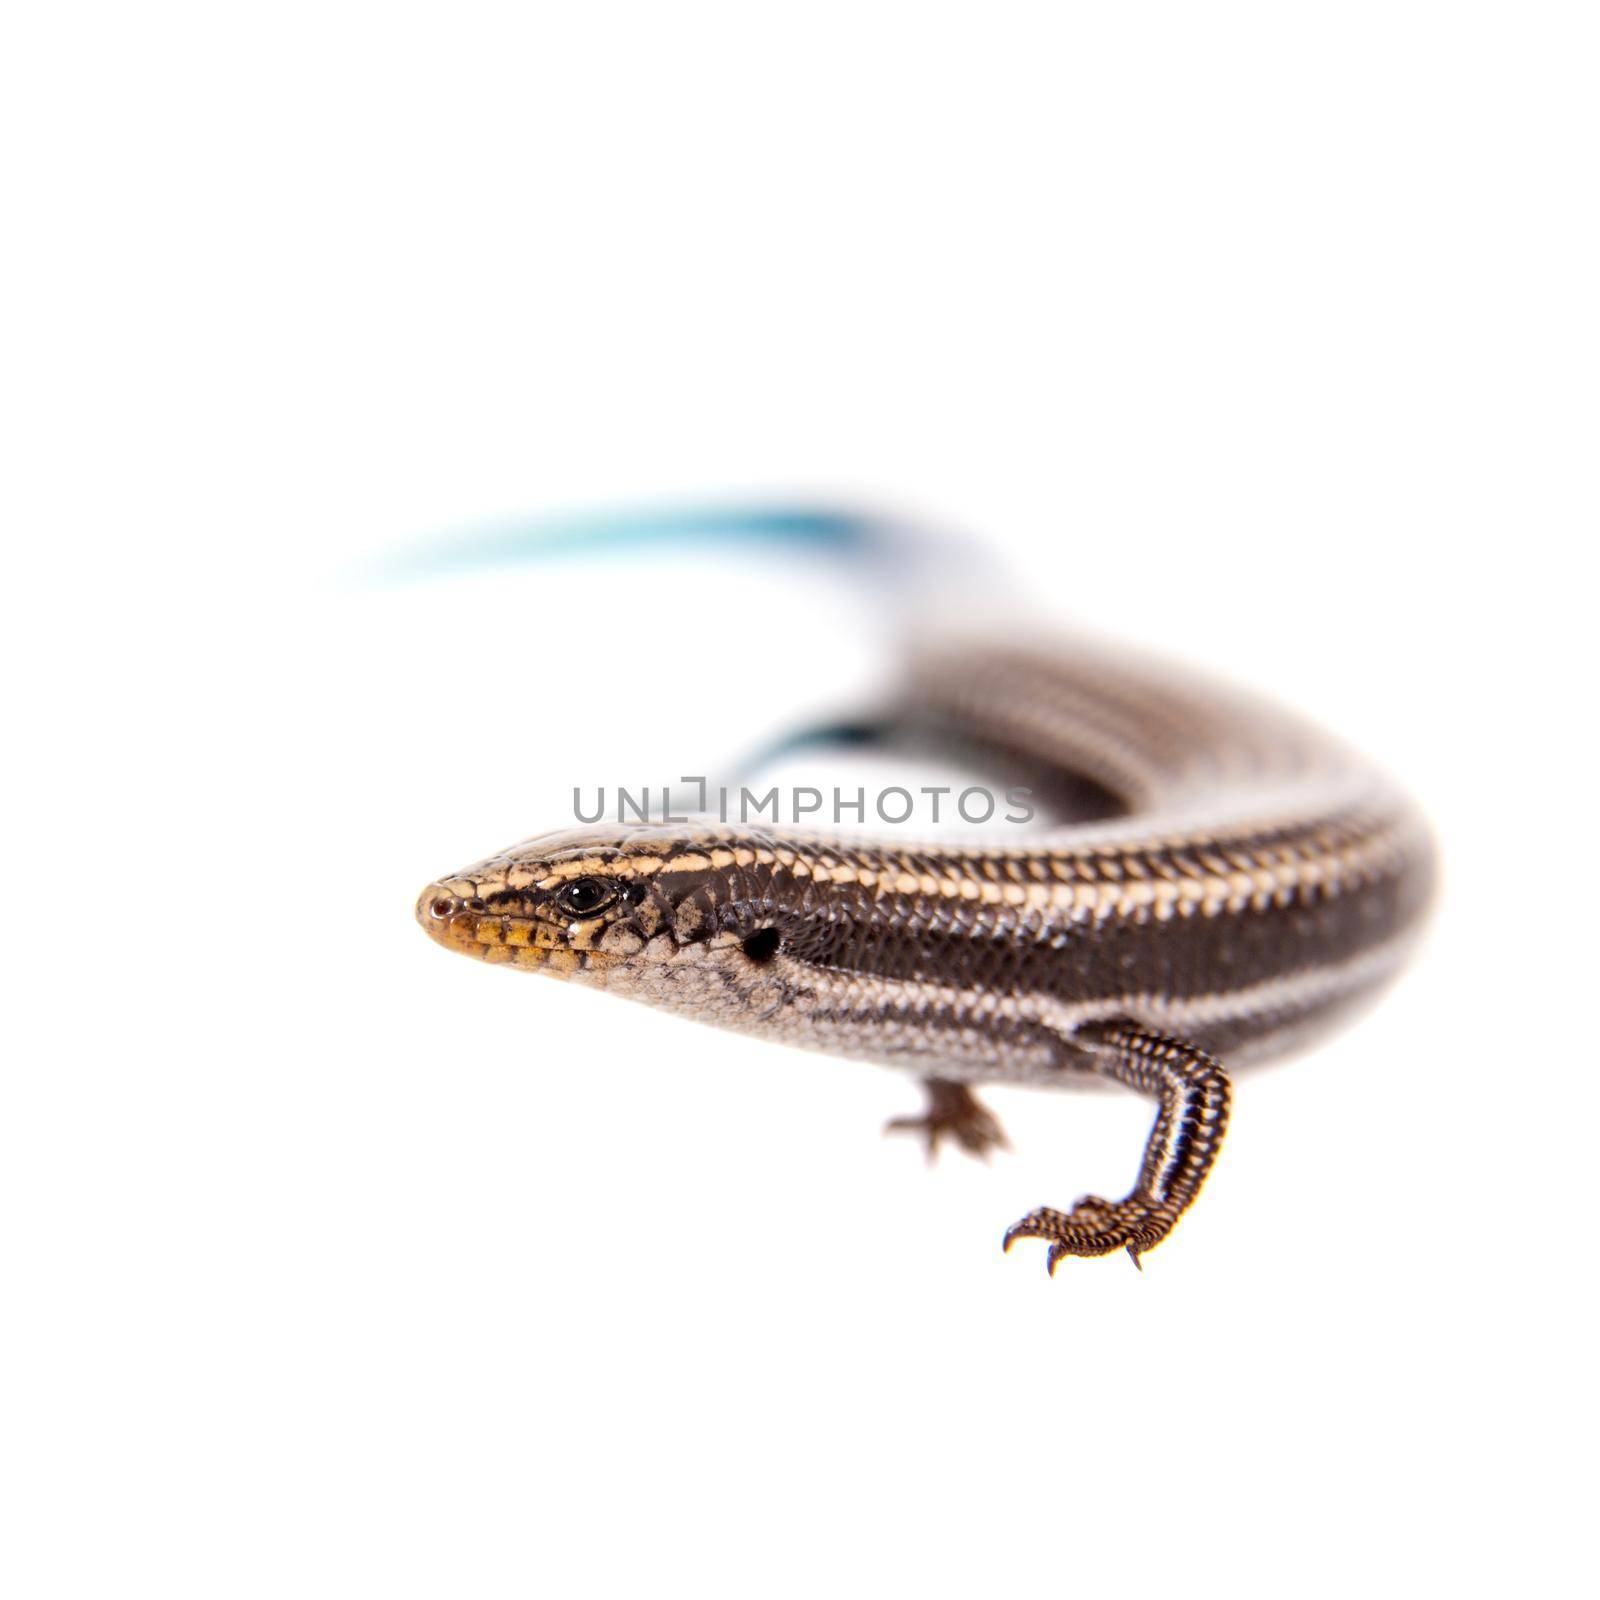 Gran Canaria skink, Chalcides sexlineatus, isolated on white background